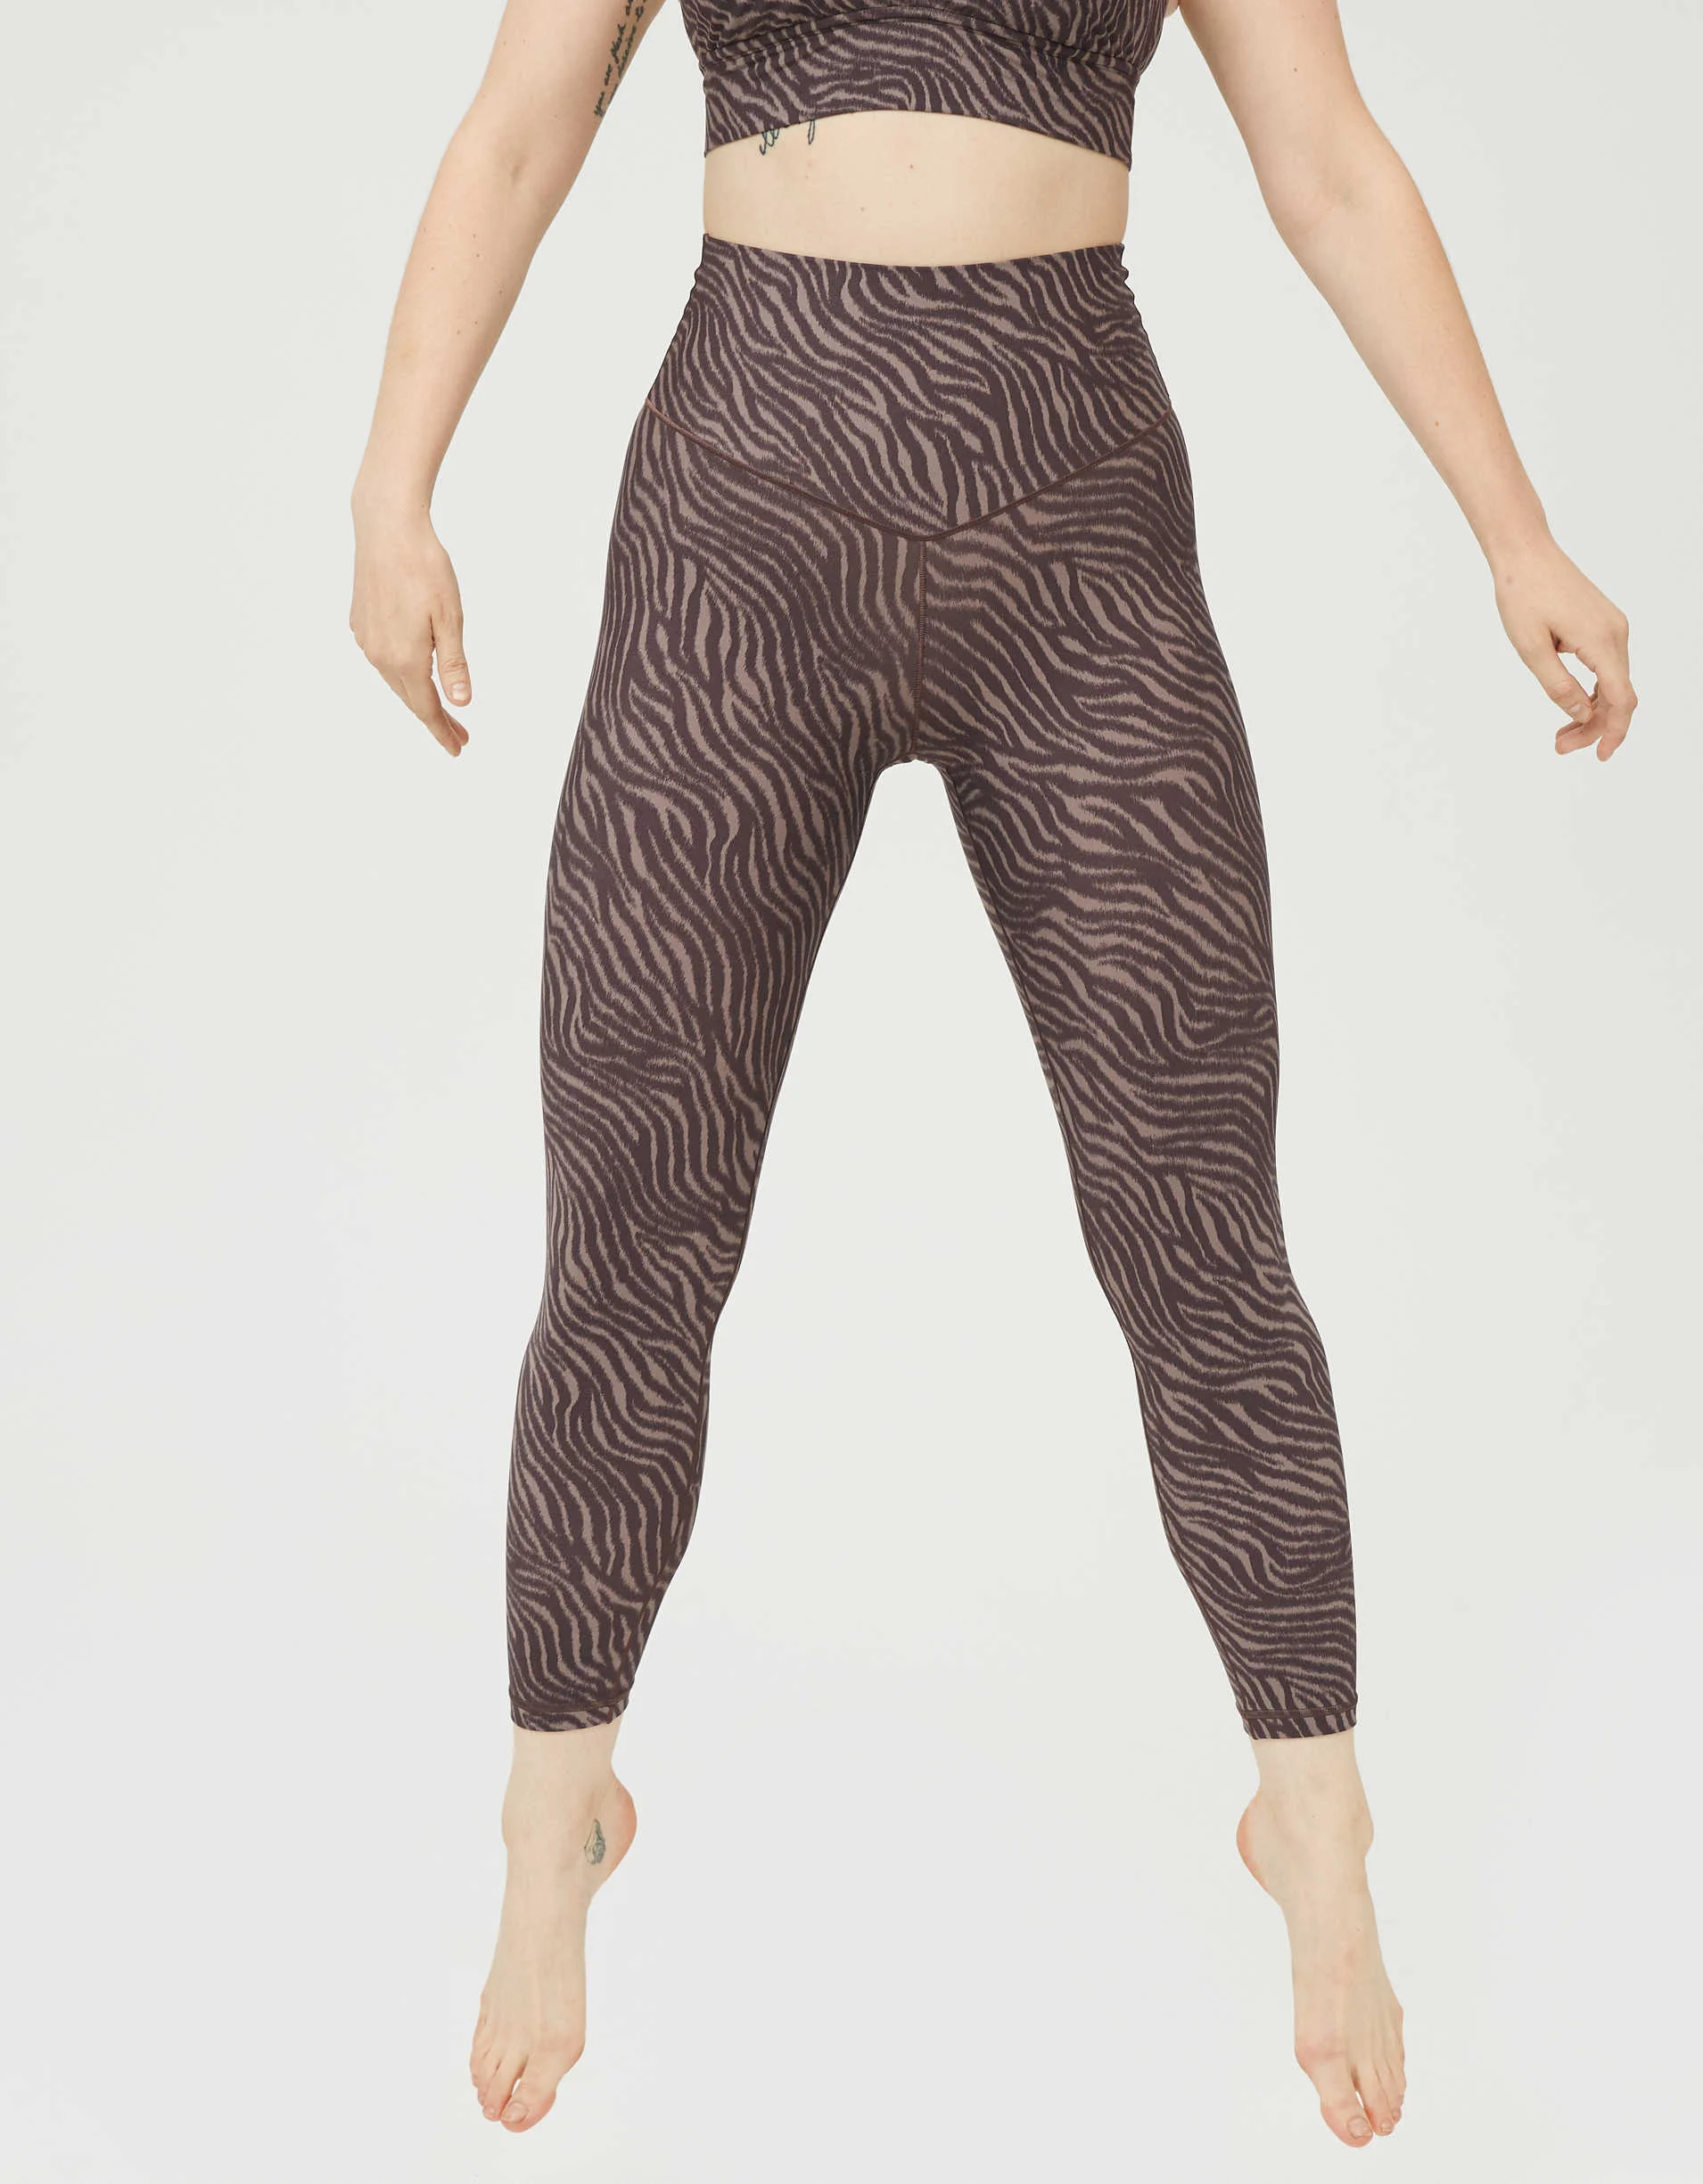 OFFLINE By Aerie Real Me High Waisted Legging  Legging, High waisted  leggings, High waisted